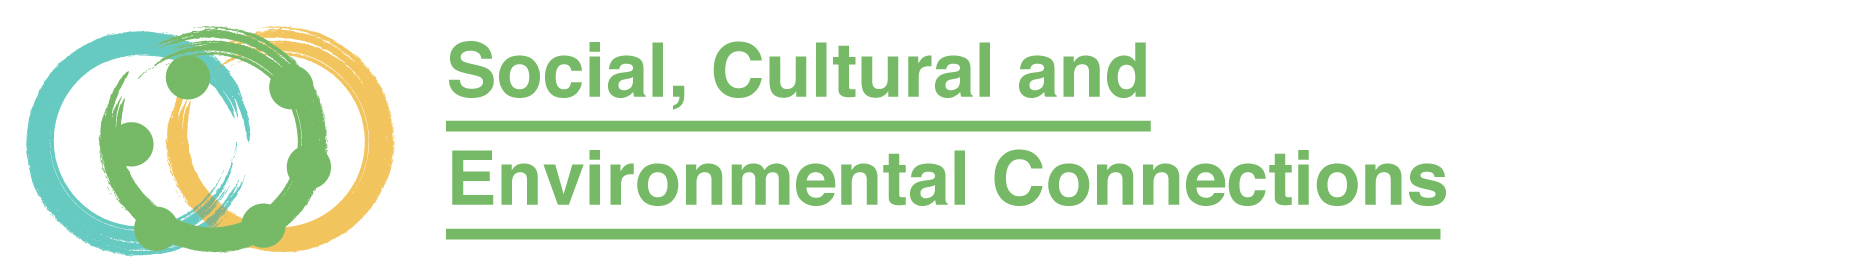 Social, Cultural and Environmental Connections